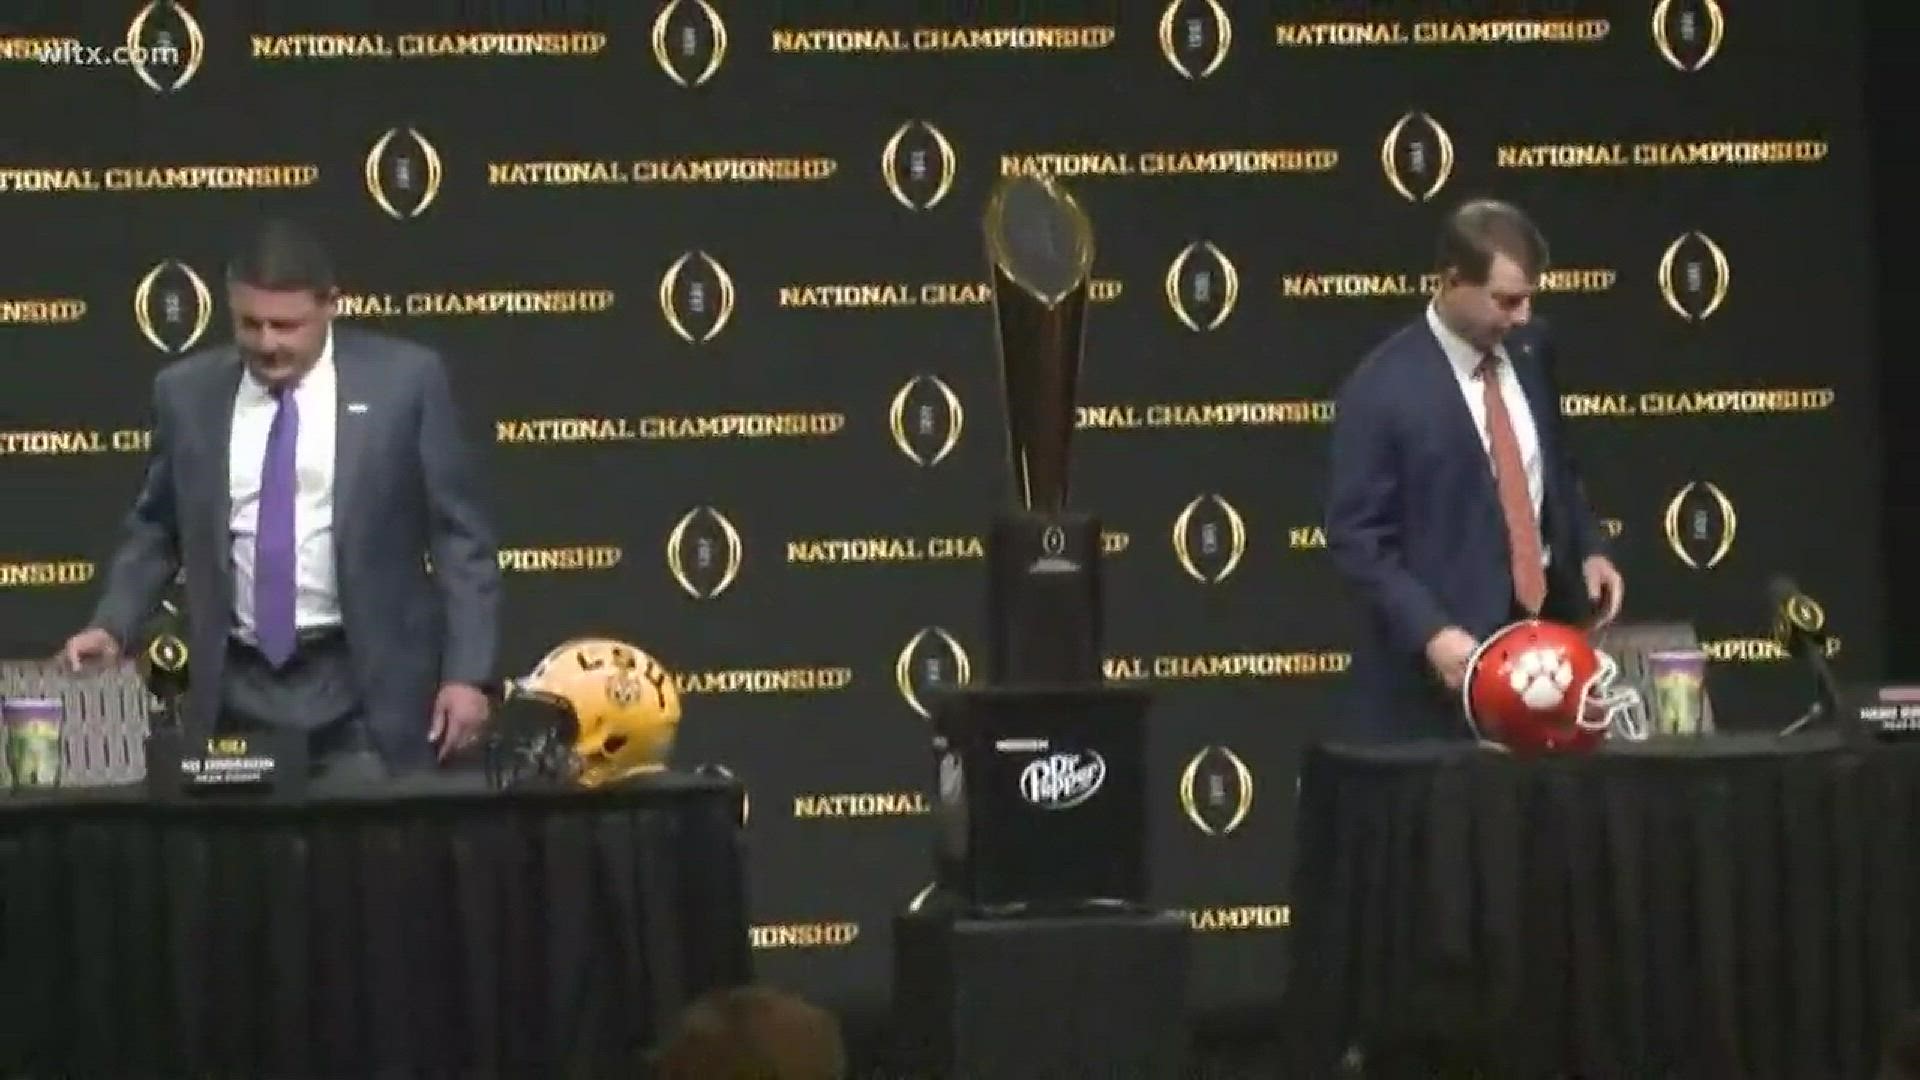 Clemson Tigers Coach Dabo Swinney and LSU Tigers Coach Ed Orgeron spoke at the official news conference for the 2020 college football national championship.